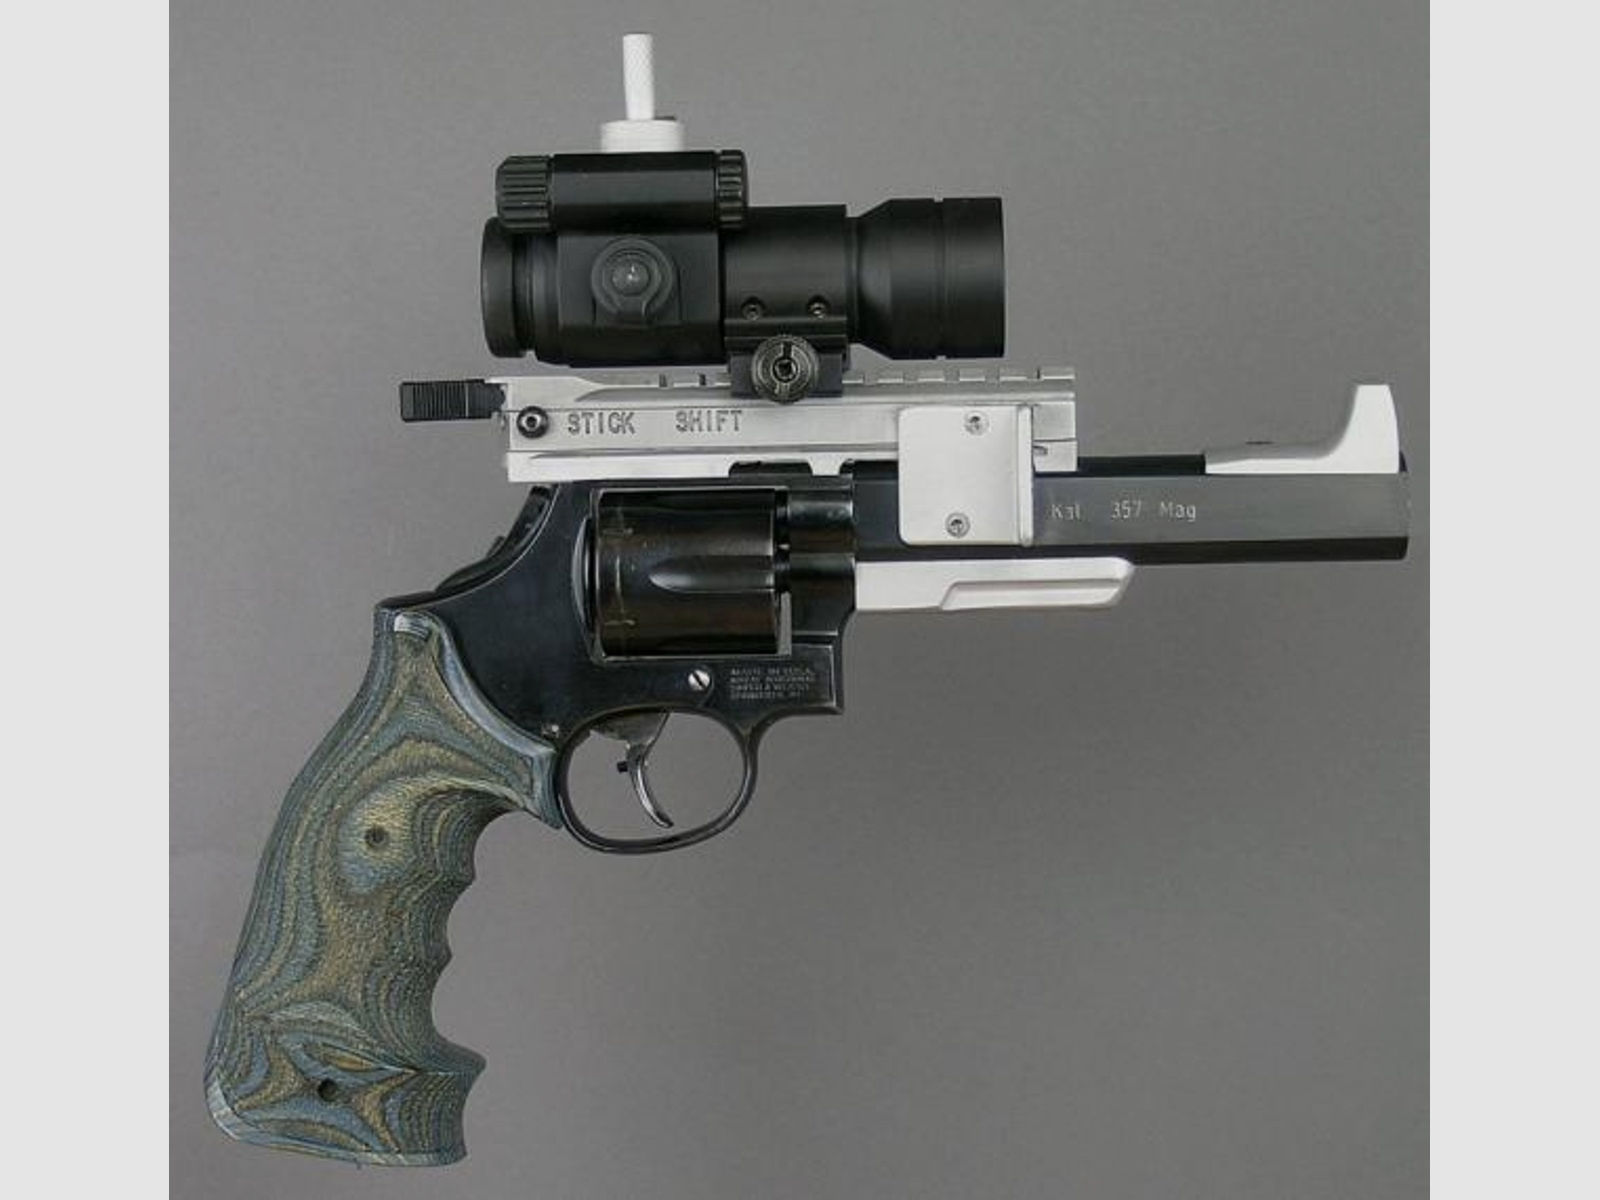 T'n T Triebel Revolver Mod. BianchiCup - S&W 686 .357Mag m.MOVER-Mount